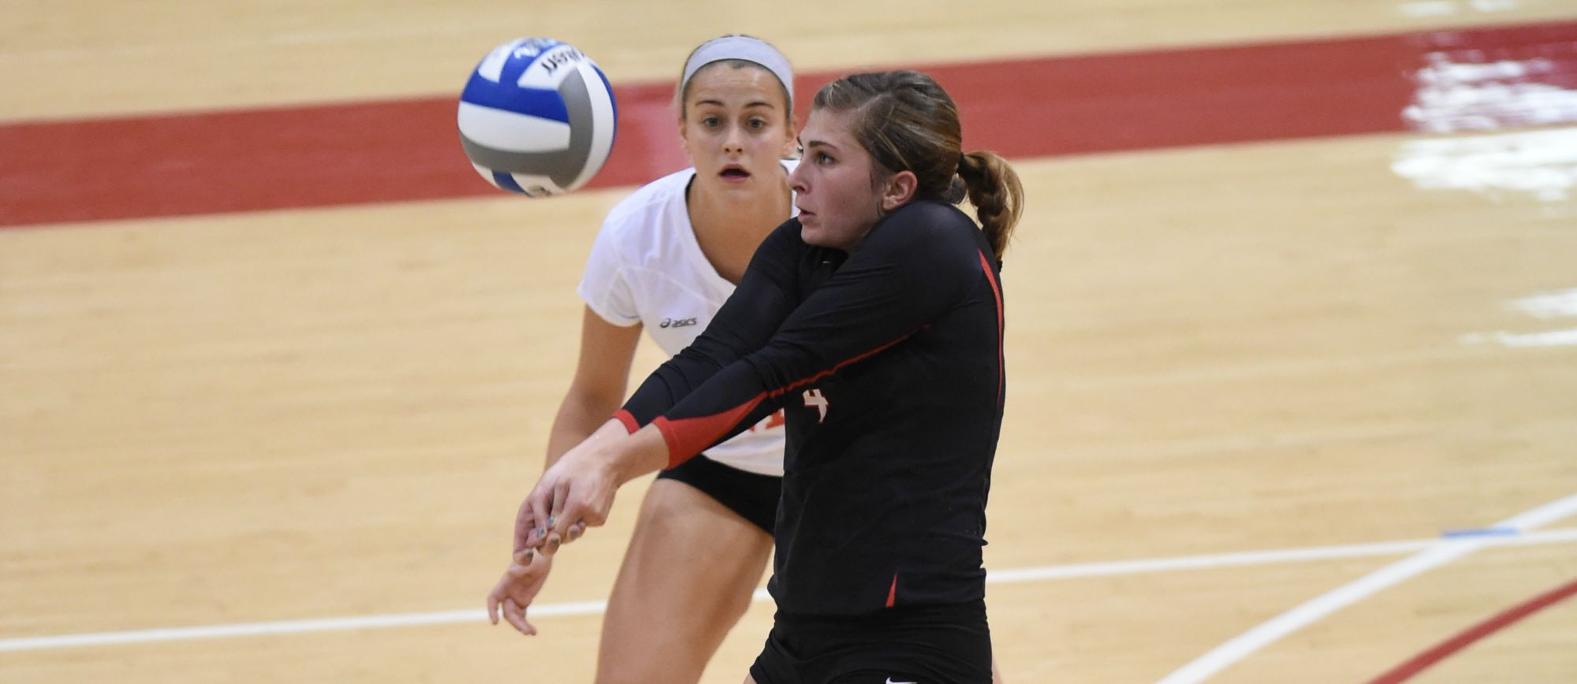 Melissa Emming (4) contributed nine kills to the Tiger offense in a sweep at Allegheny. File Photo | Nick Falzerano